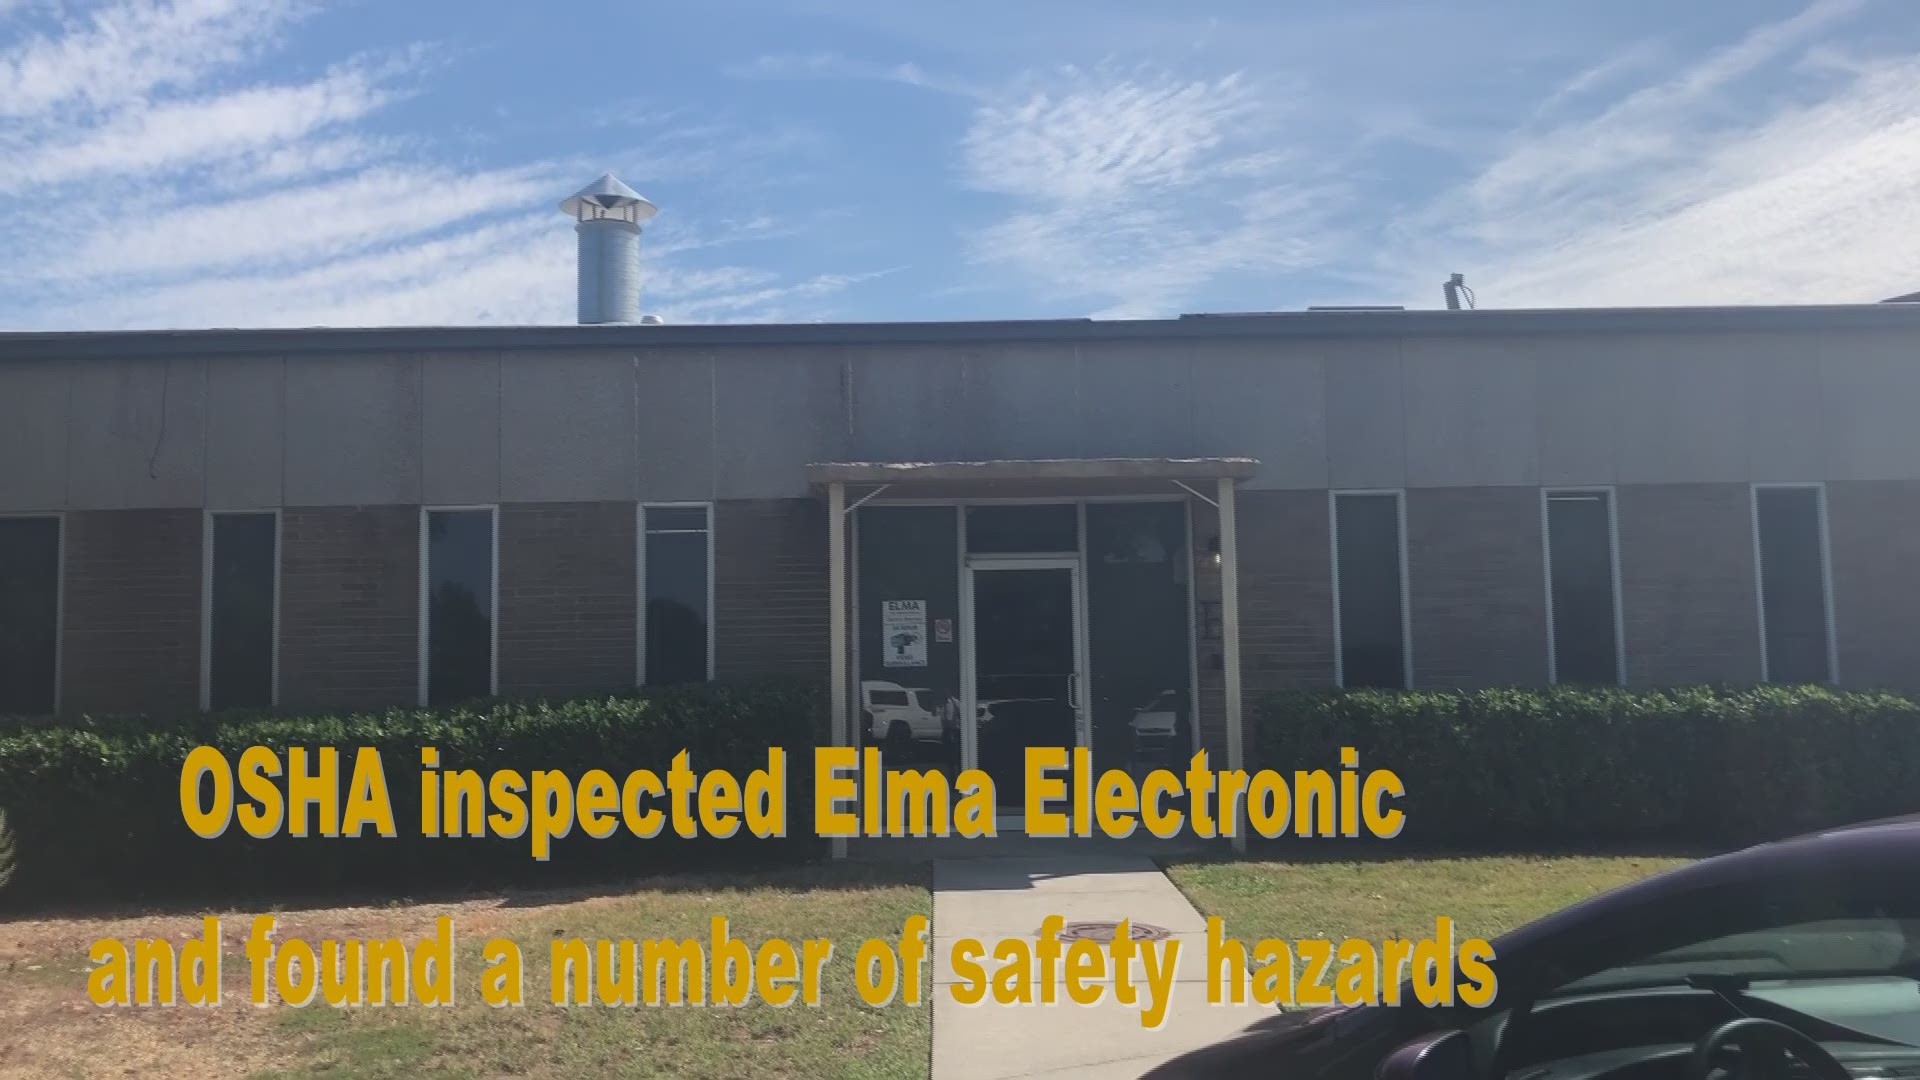 OSHA cites Elma Electronics more than $161,000 in fines for various safety violations.